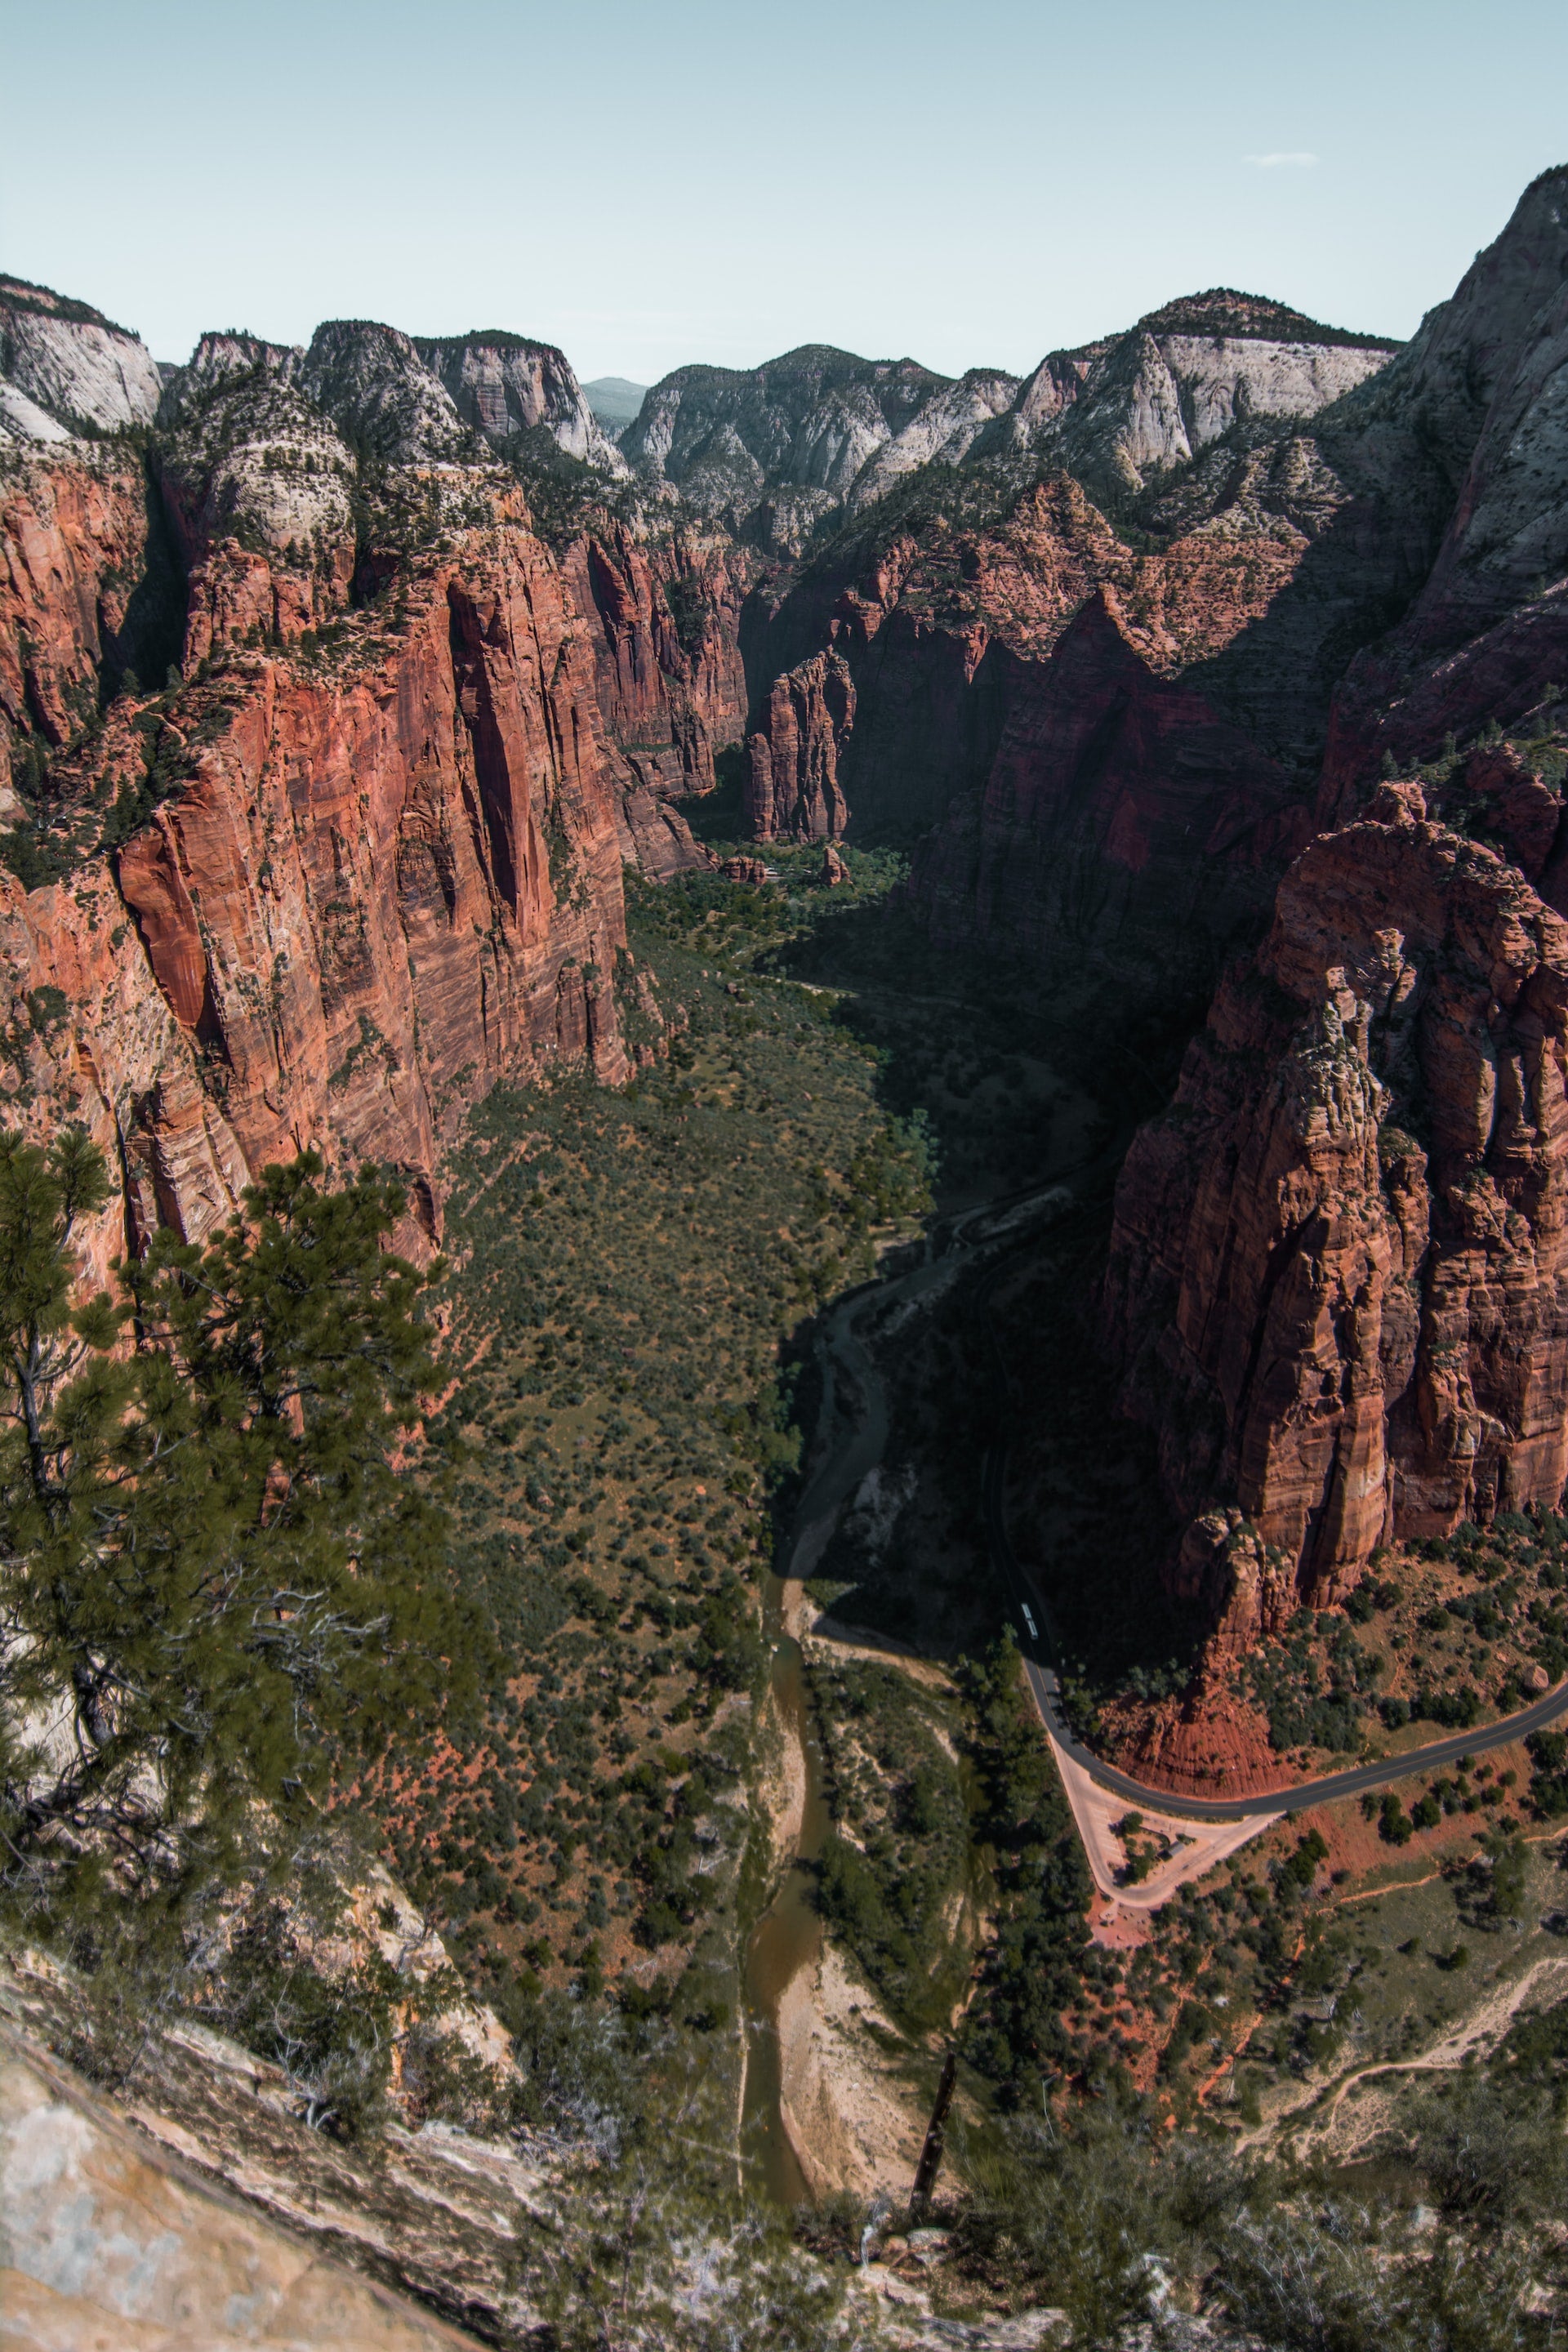 Soar to New Heights: Exploring Angels Landing in Zion National Park